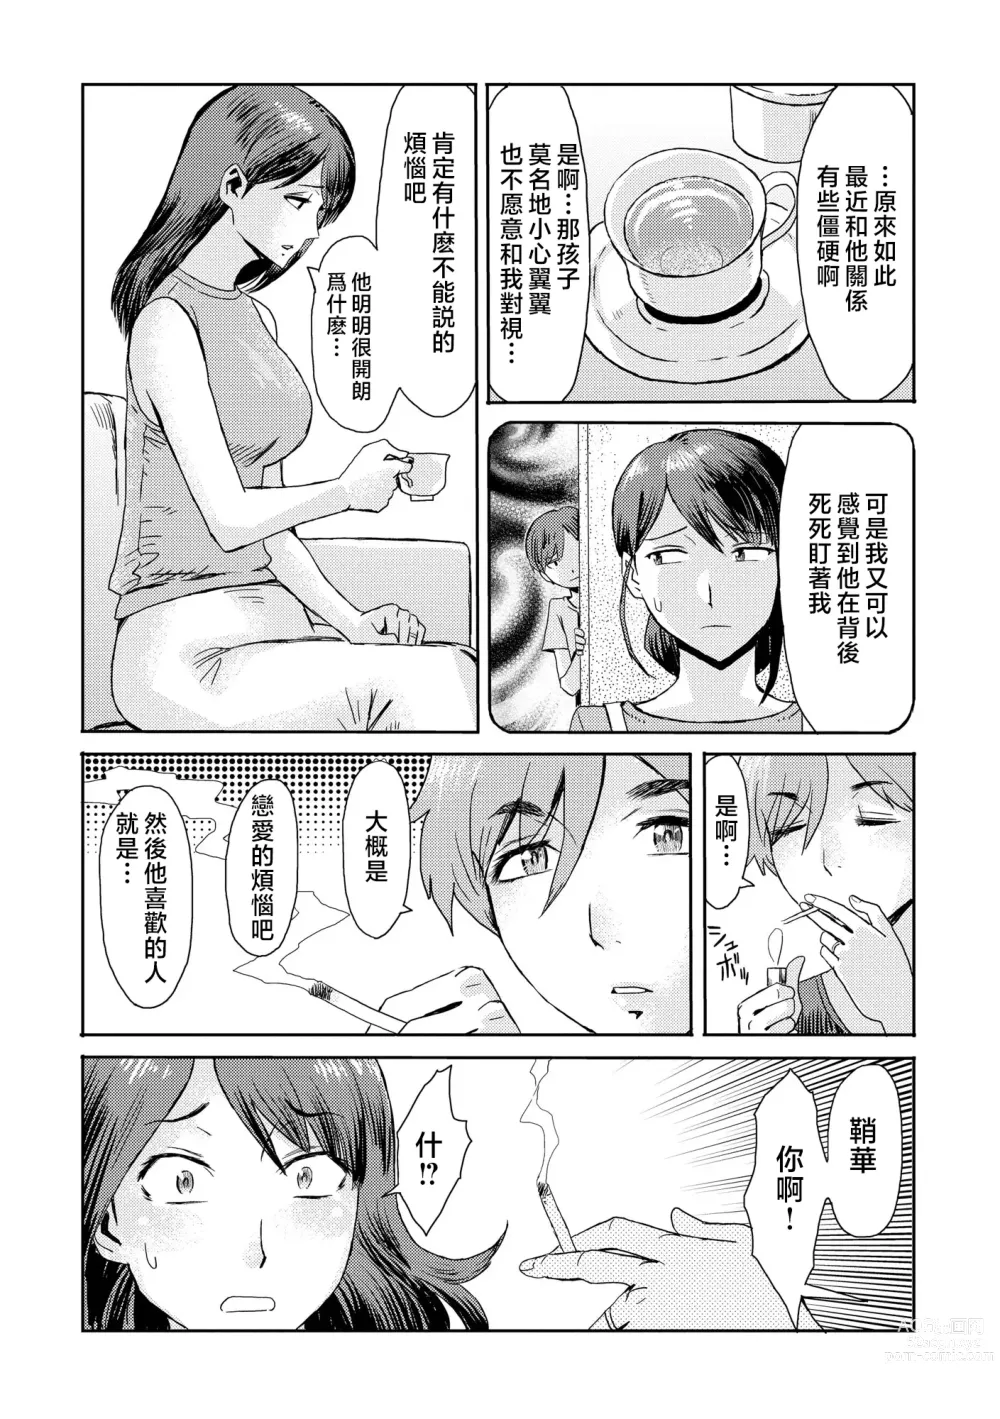 Page 3 of manga Soukan Syndrome Ch. 2 (decensored)